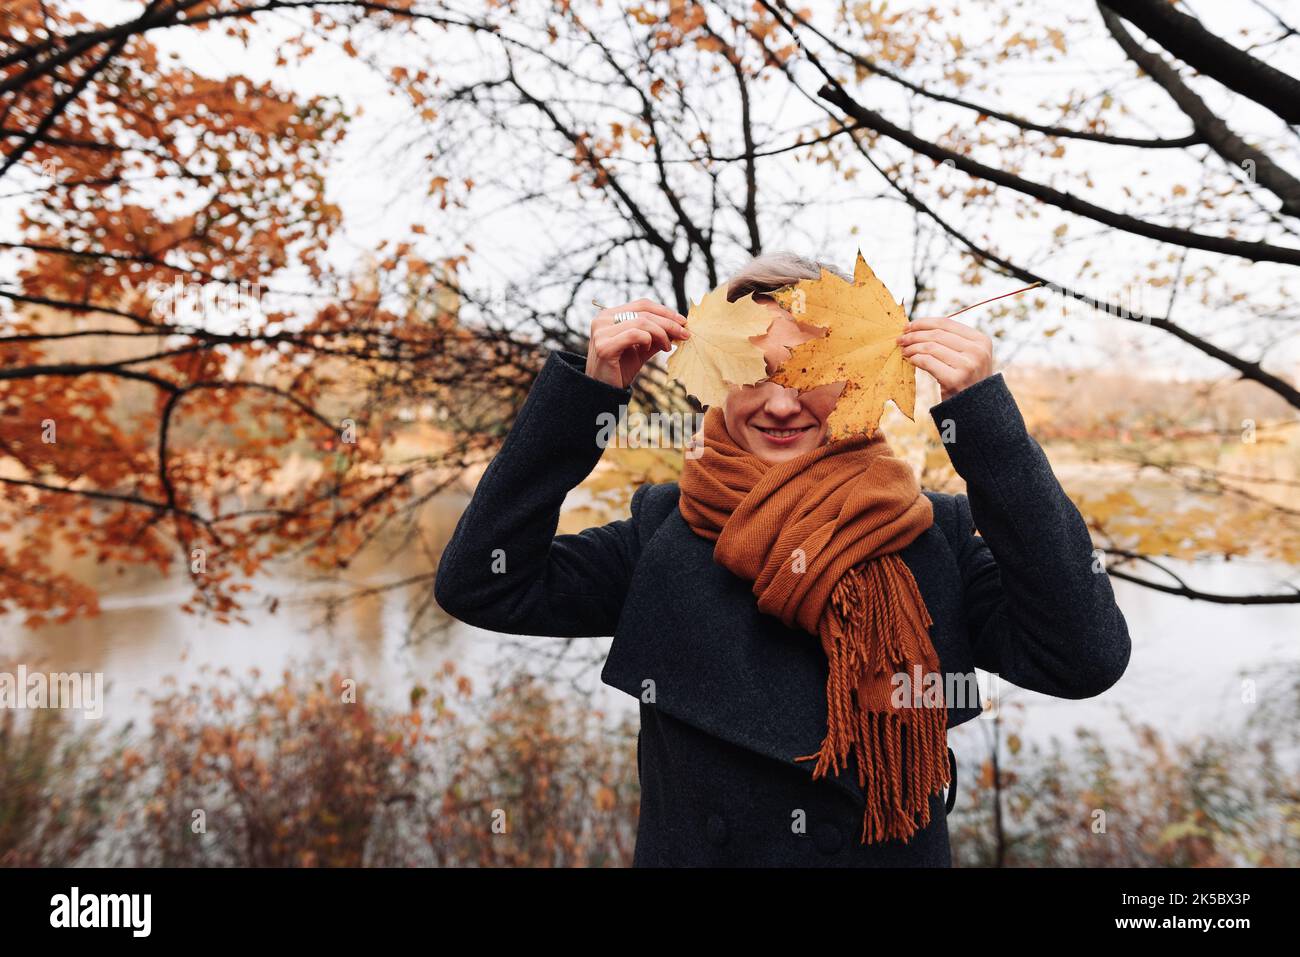 A woman in a coat and scarf in an autumn park covers her face with maple leaves. Stock Photo